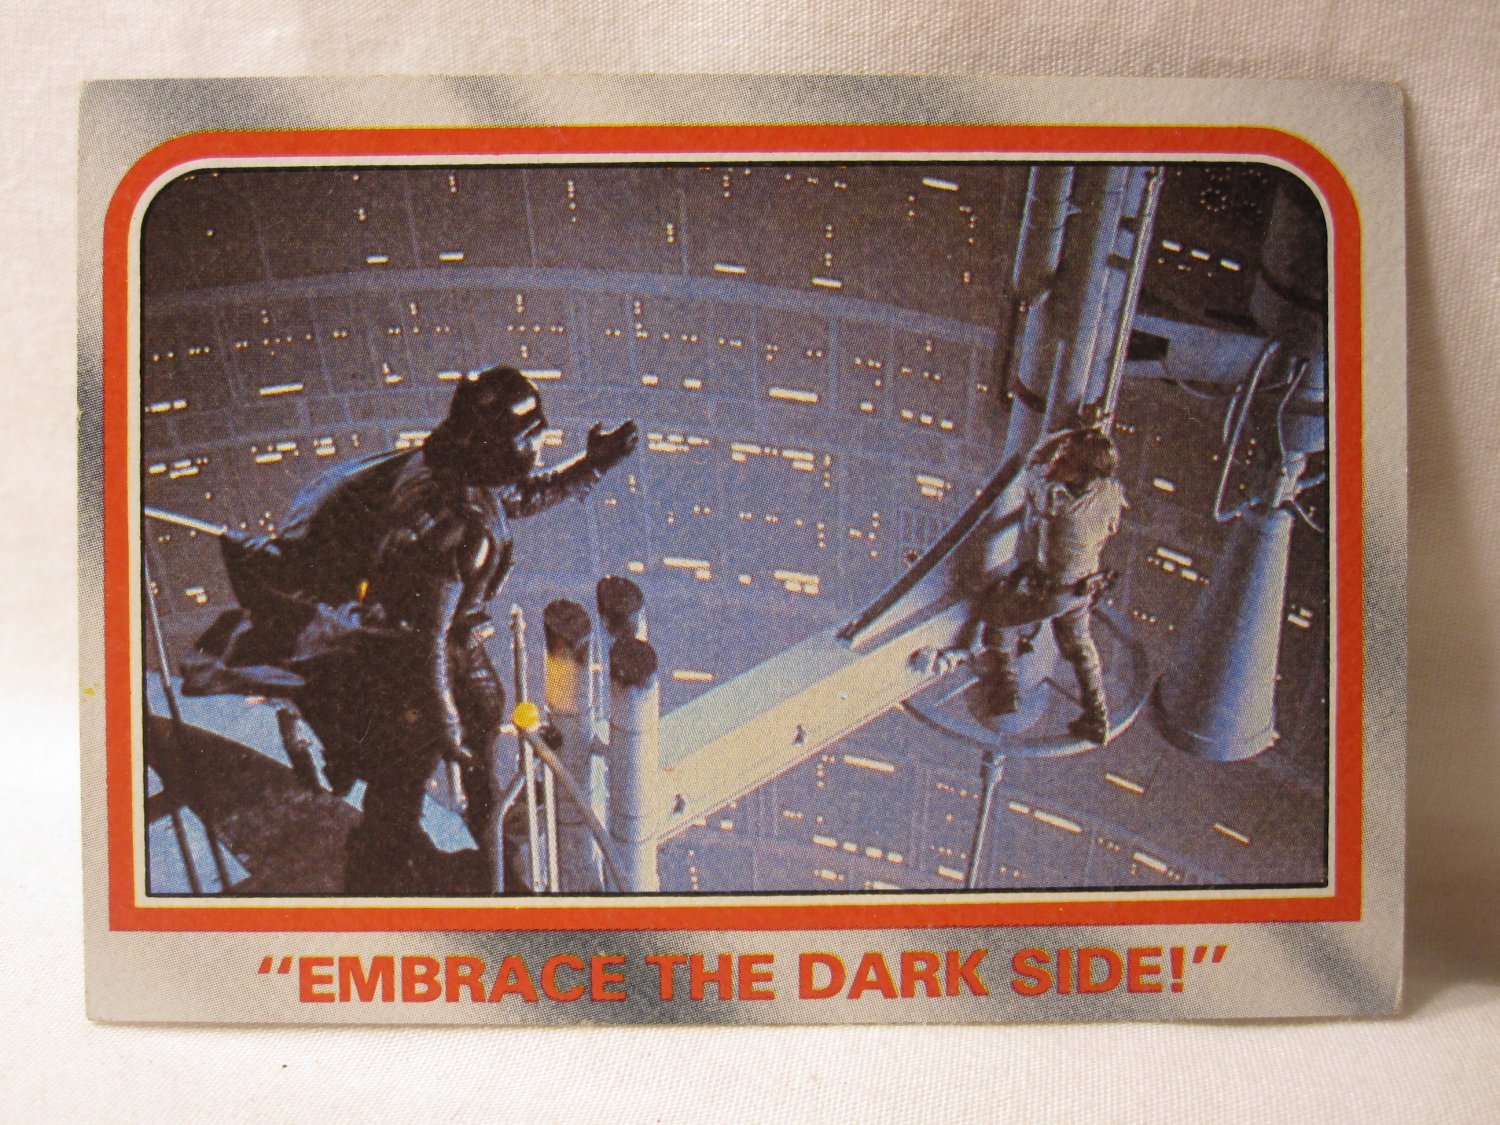 1980 Star Wars - Empire Strikes Back Trading card #114: Embrace the Dark Side